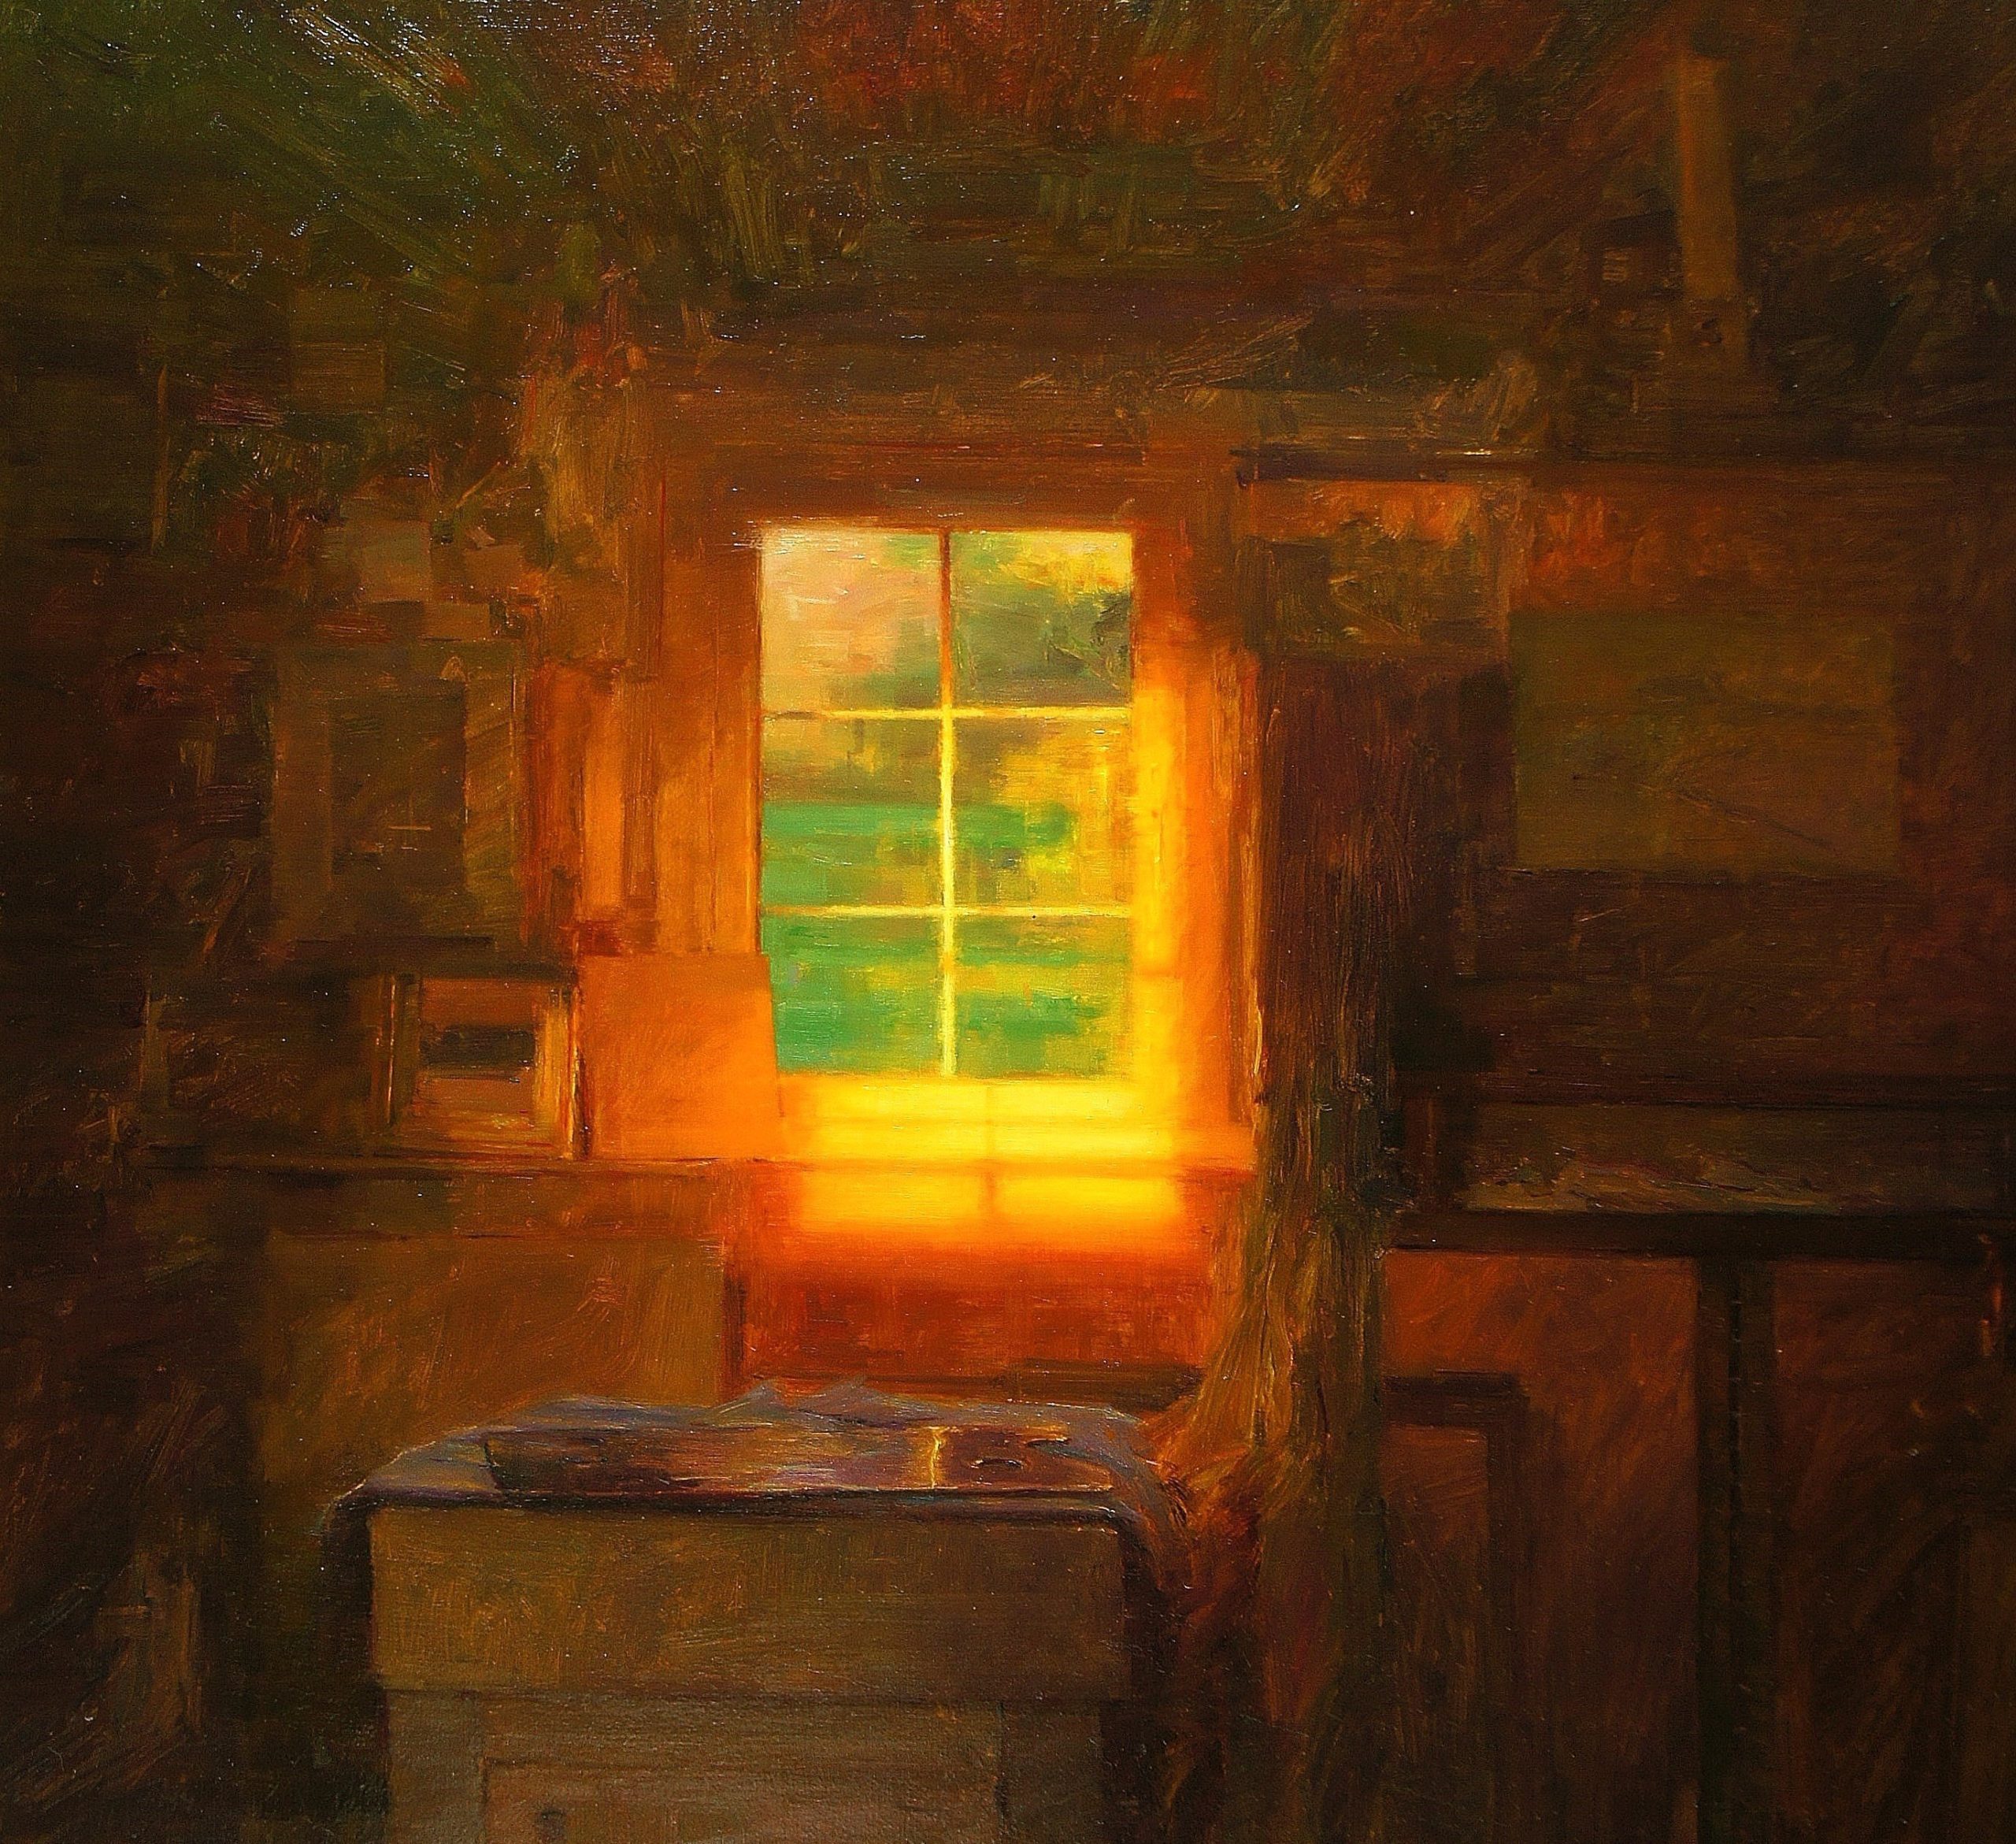 Oil painting - Kenny McKendry, "Studio Window, Morning," oil on board, 26 x 18 in.